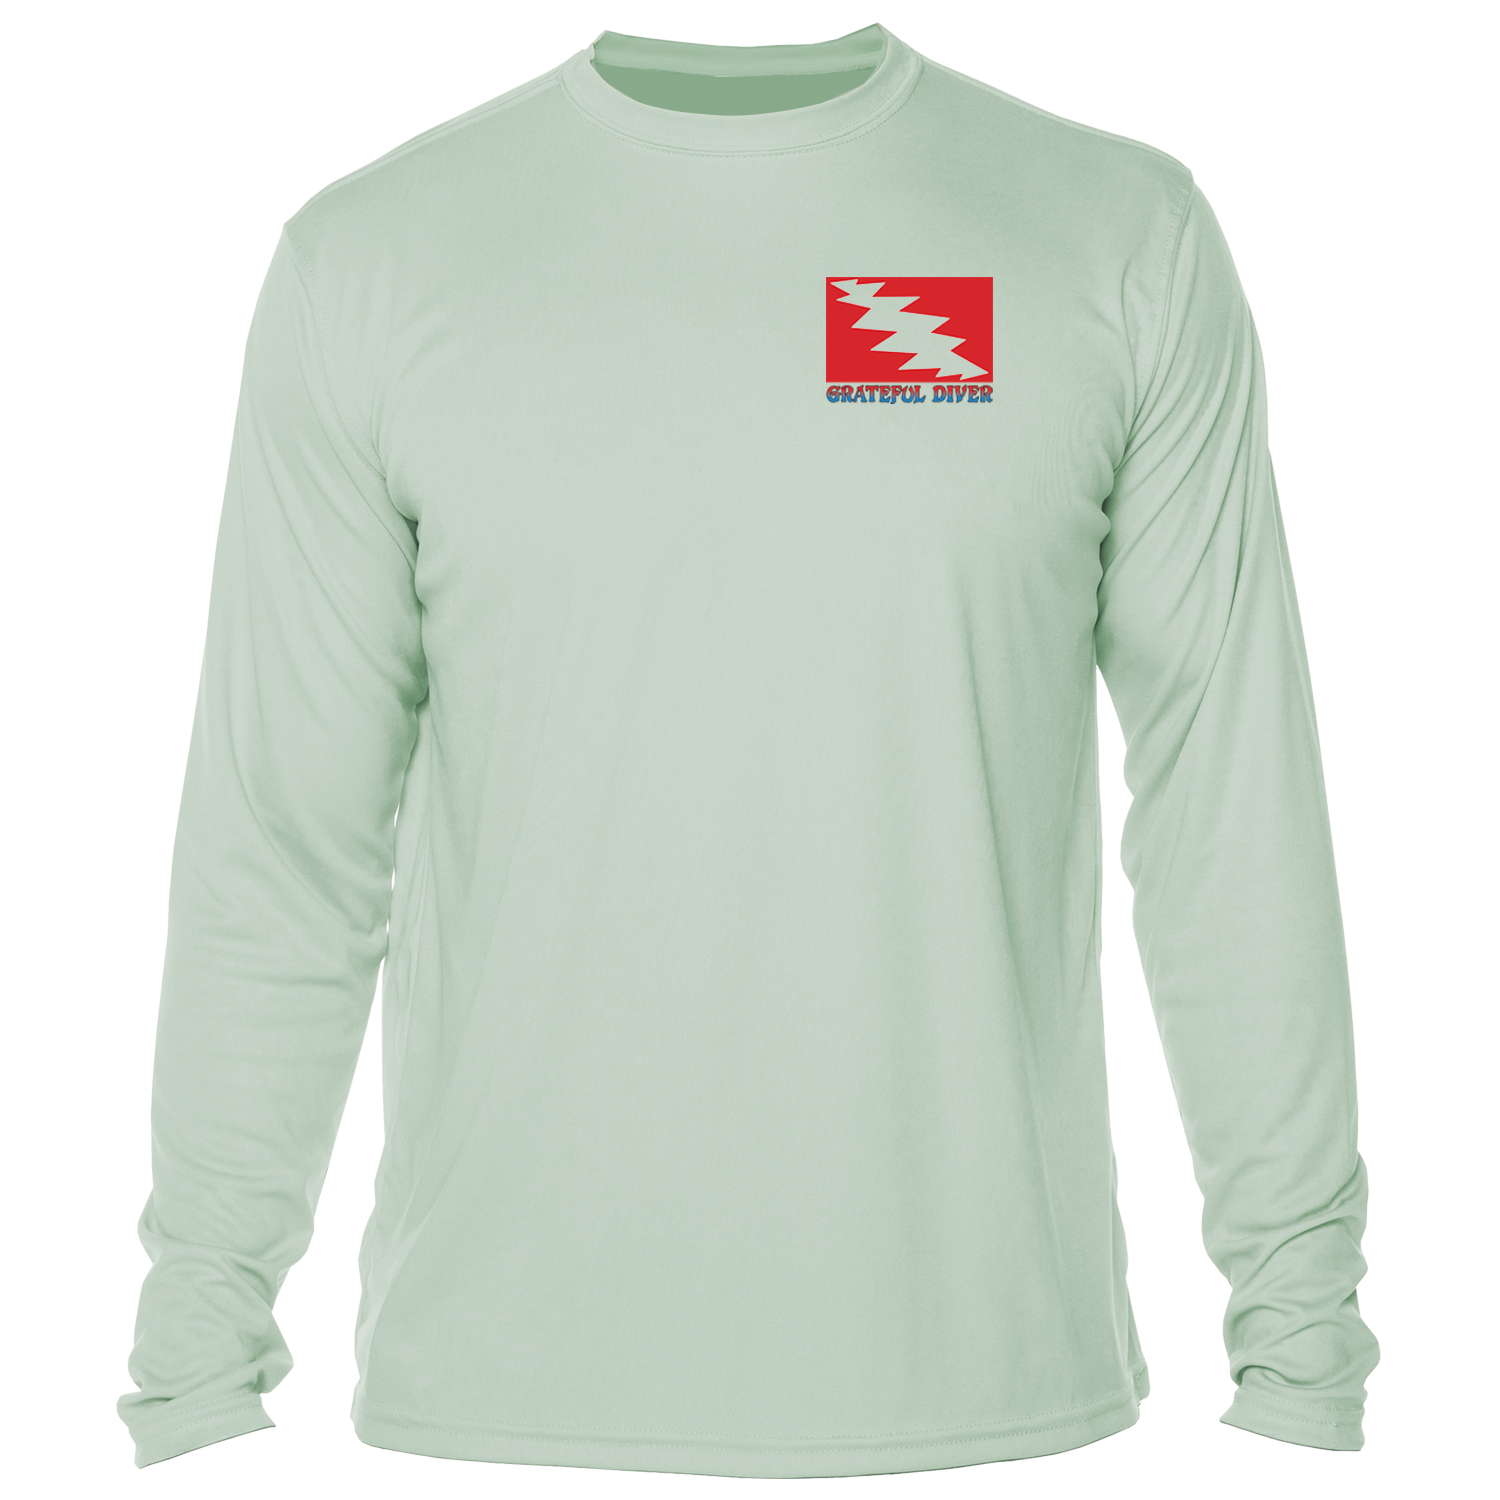 front of Grateful Diver's Artist's Collection: Island Life UV Shirt in seagrass showing the classic dive flag logo